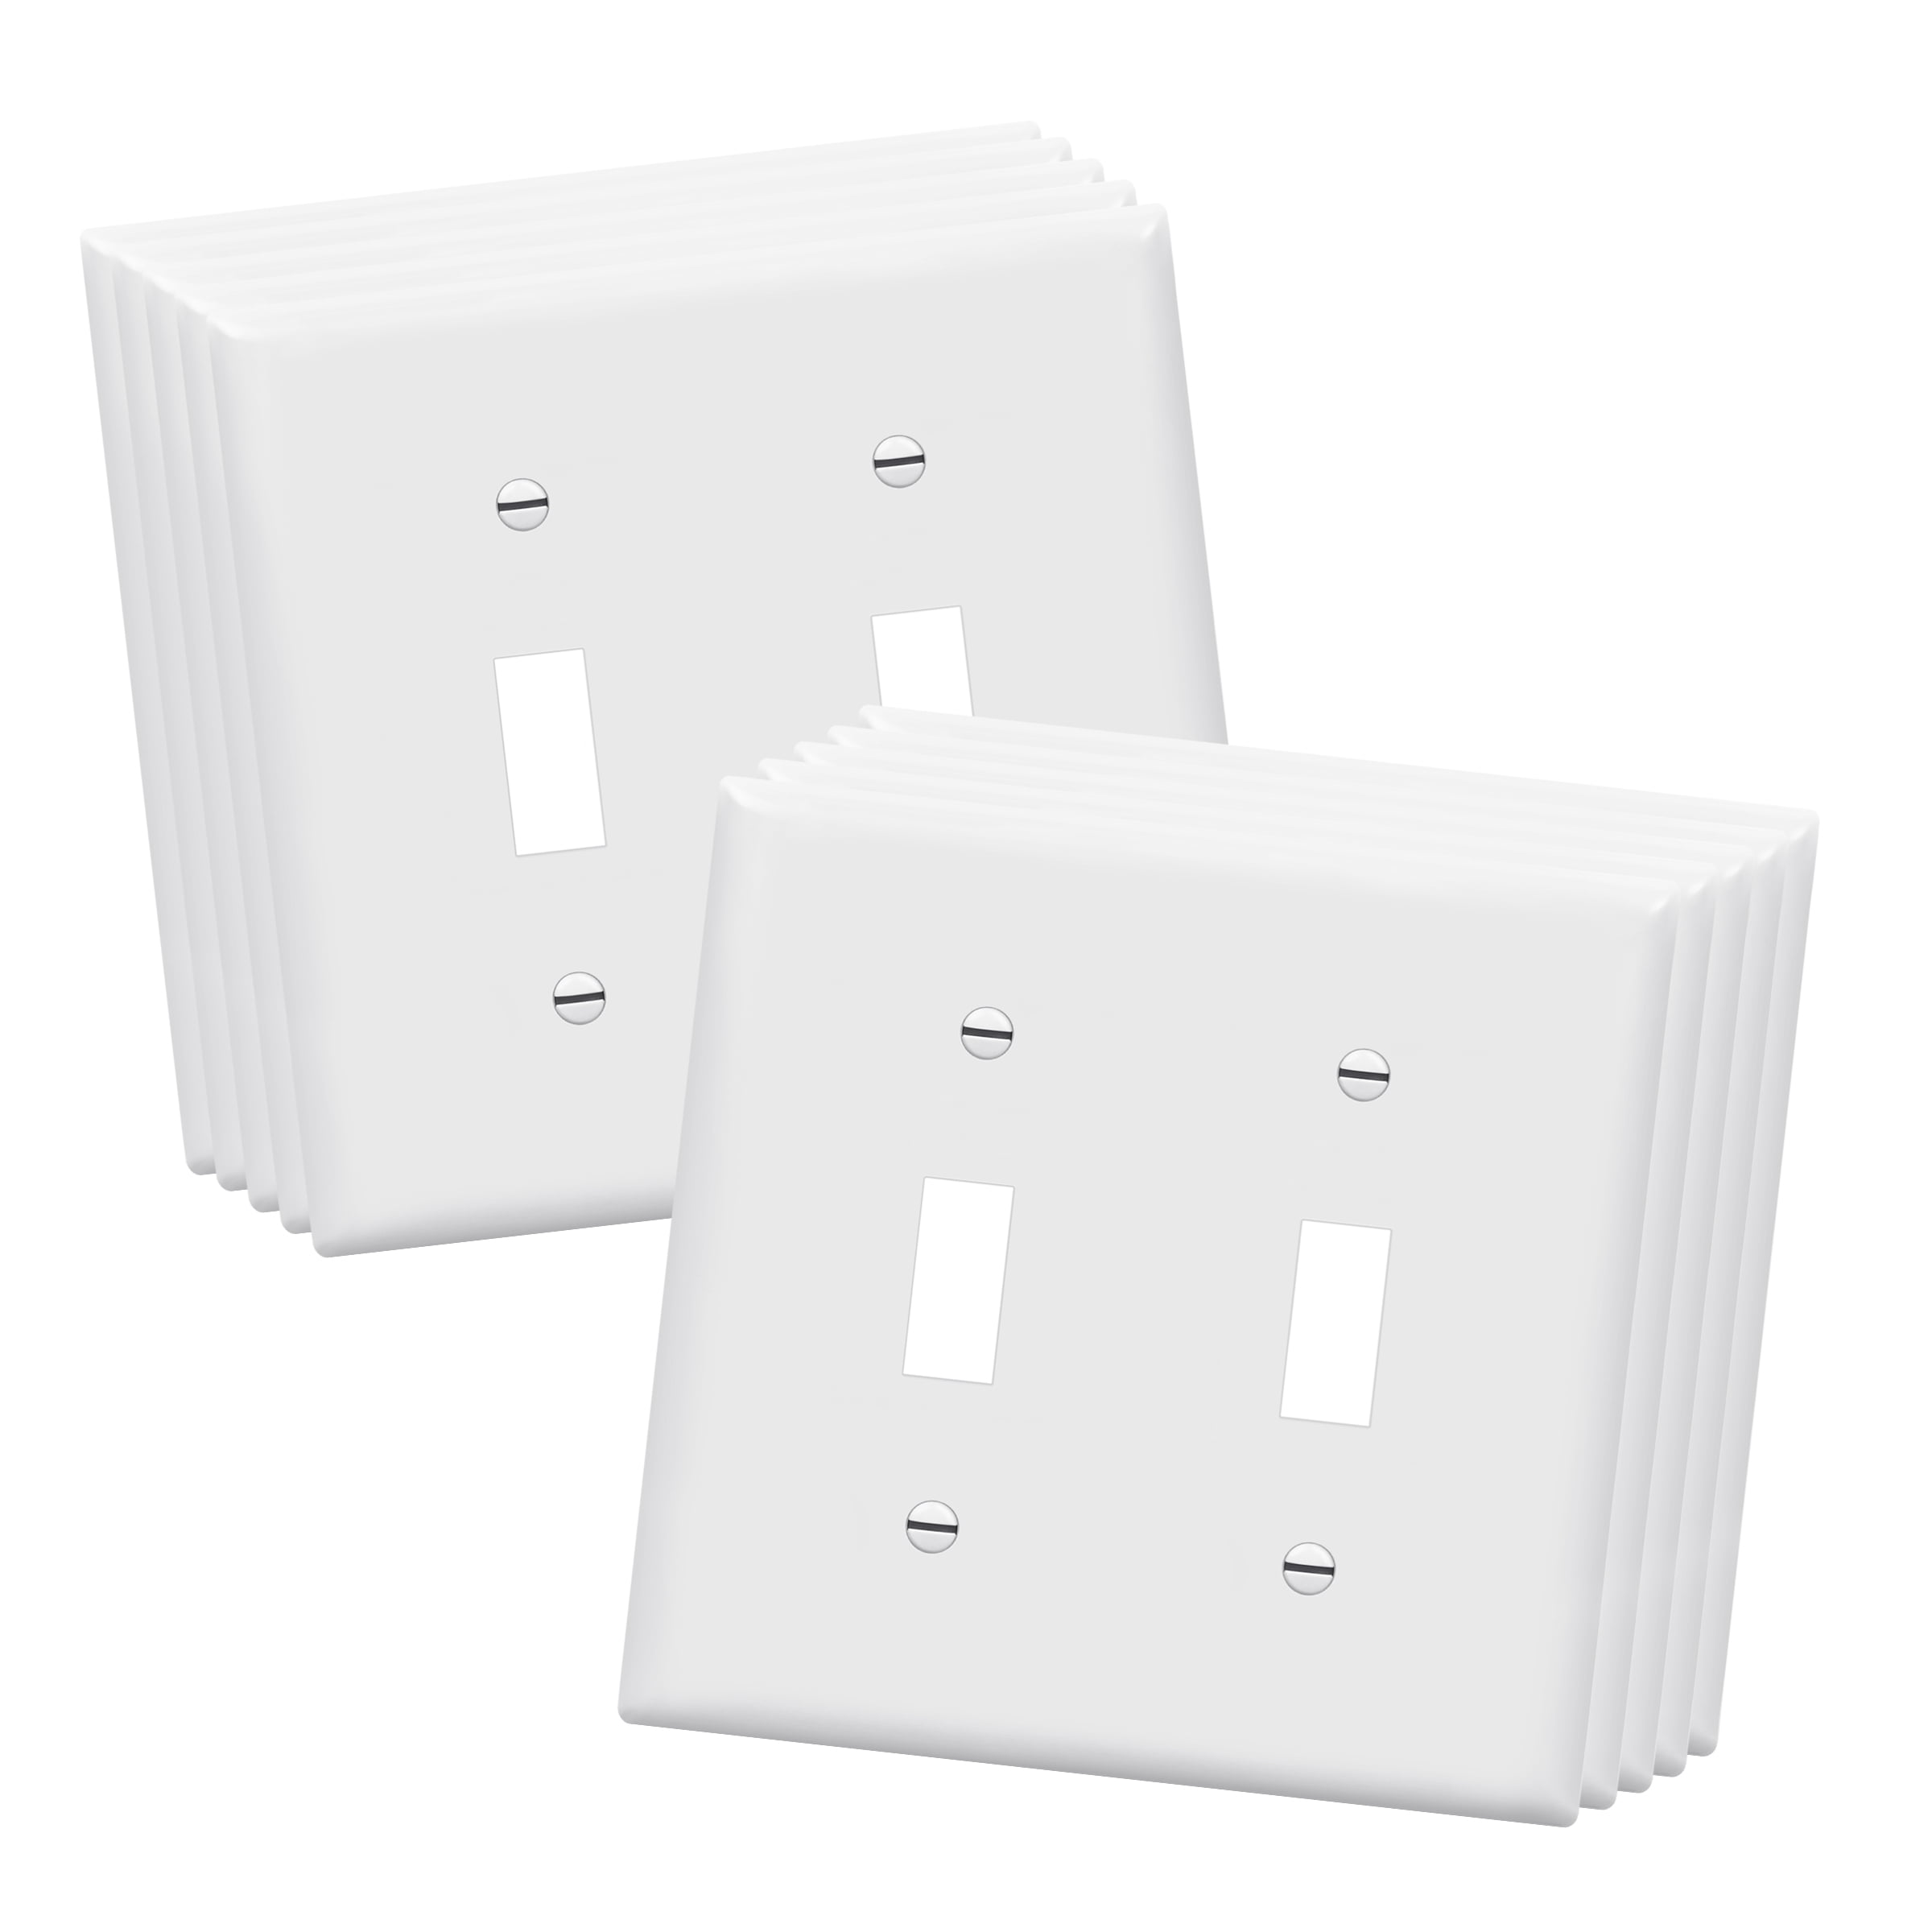 Enerlites Screwless Wall Plate Outlet Covers for Switches 1-5 Gang White